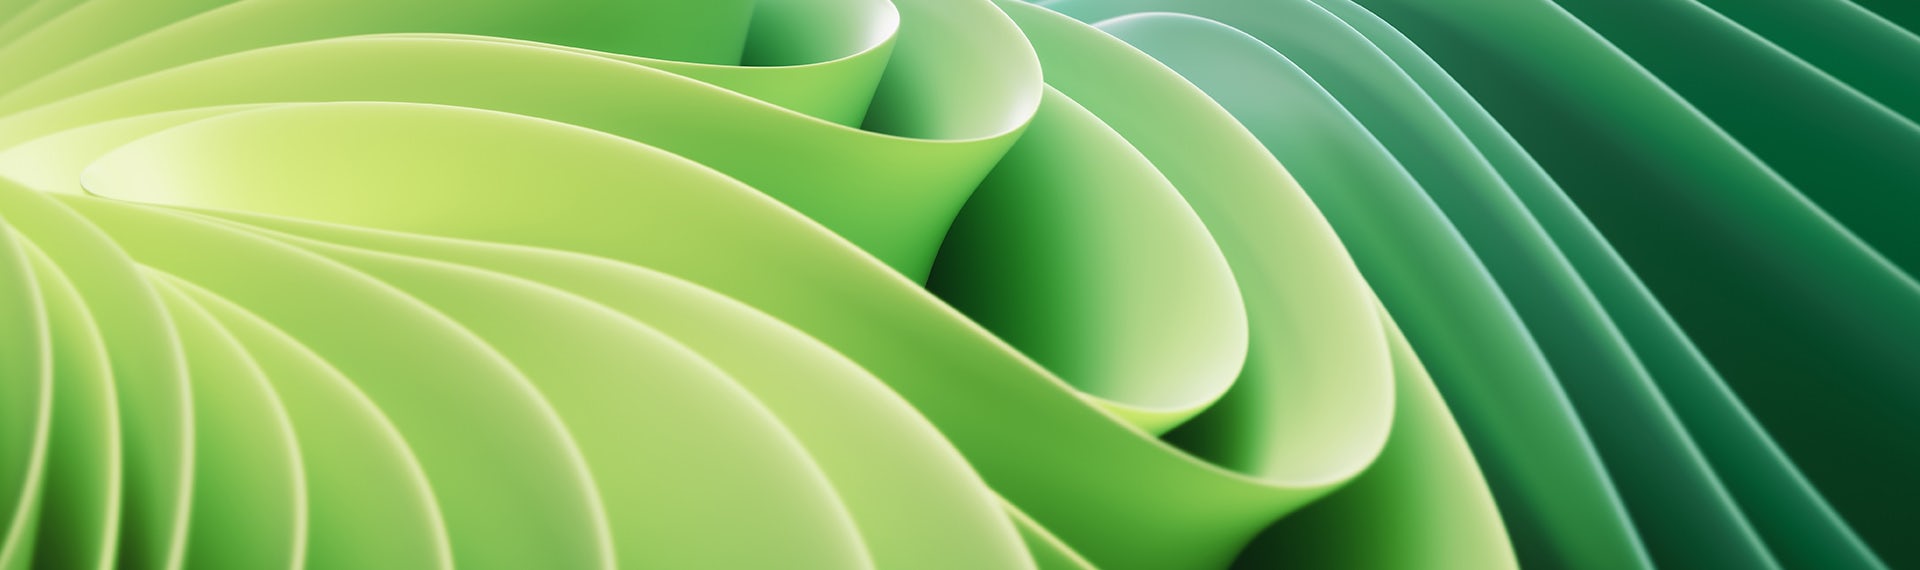 green-abstract-wave-pattern-getty-1472031694-cta-banner